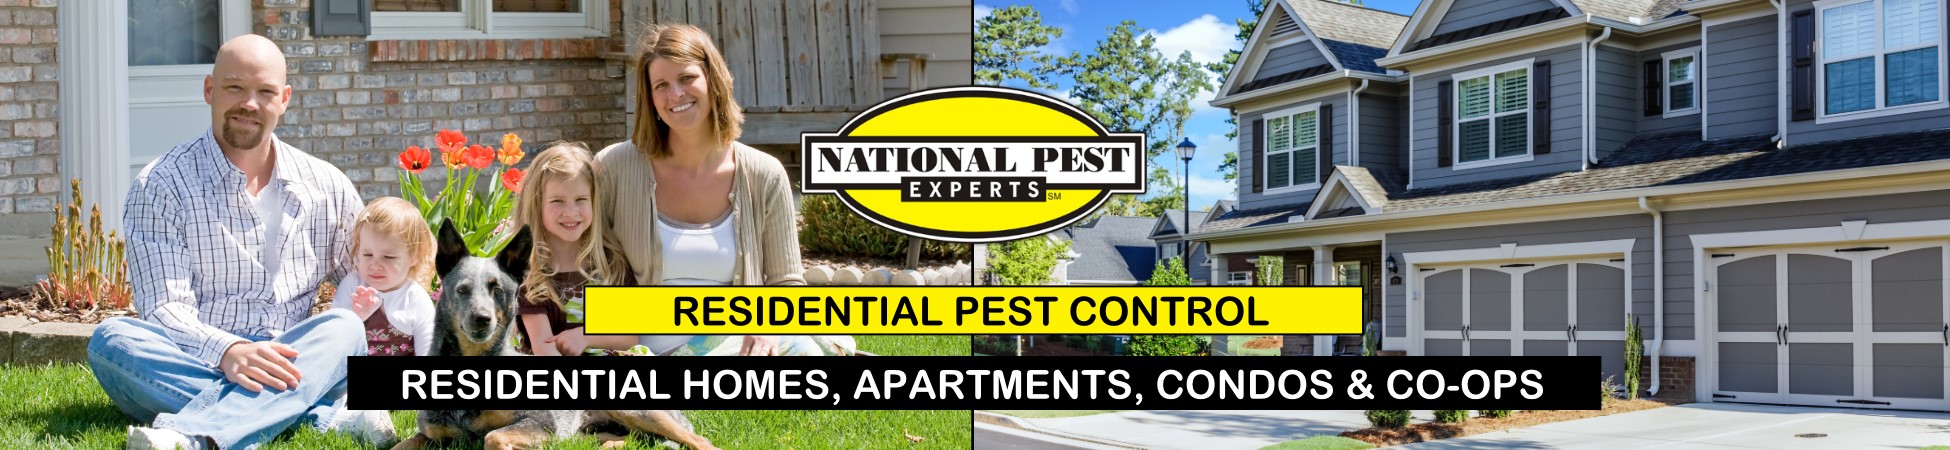 National Pest Experts - Residential exterminating and pest control in Massapequa Park, NY